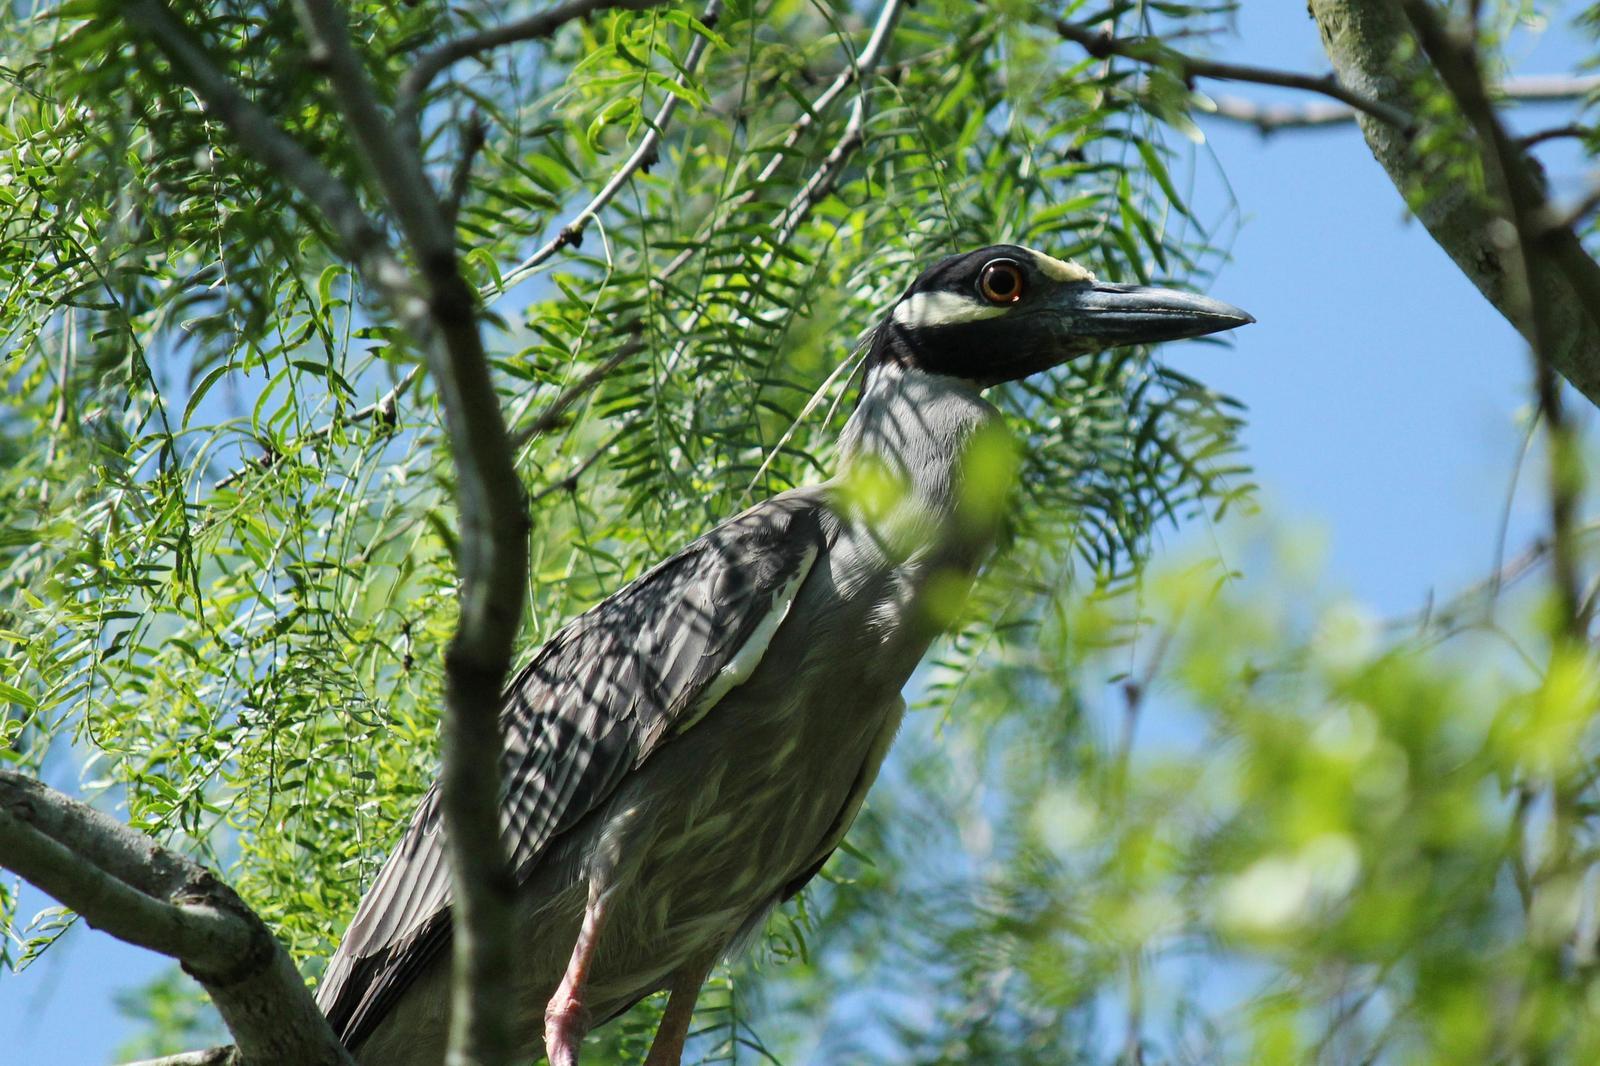 Yellow-crowned Night-Heron Photo by Kristy Baker